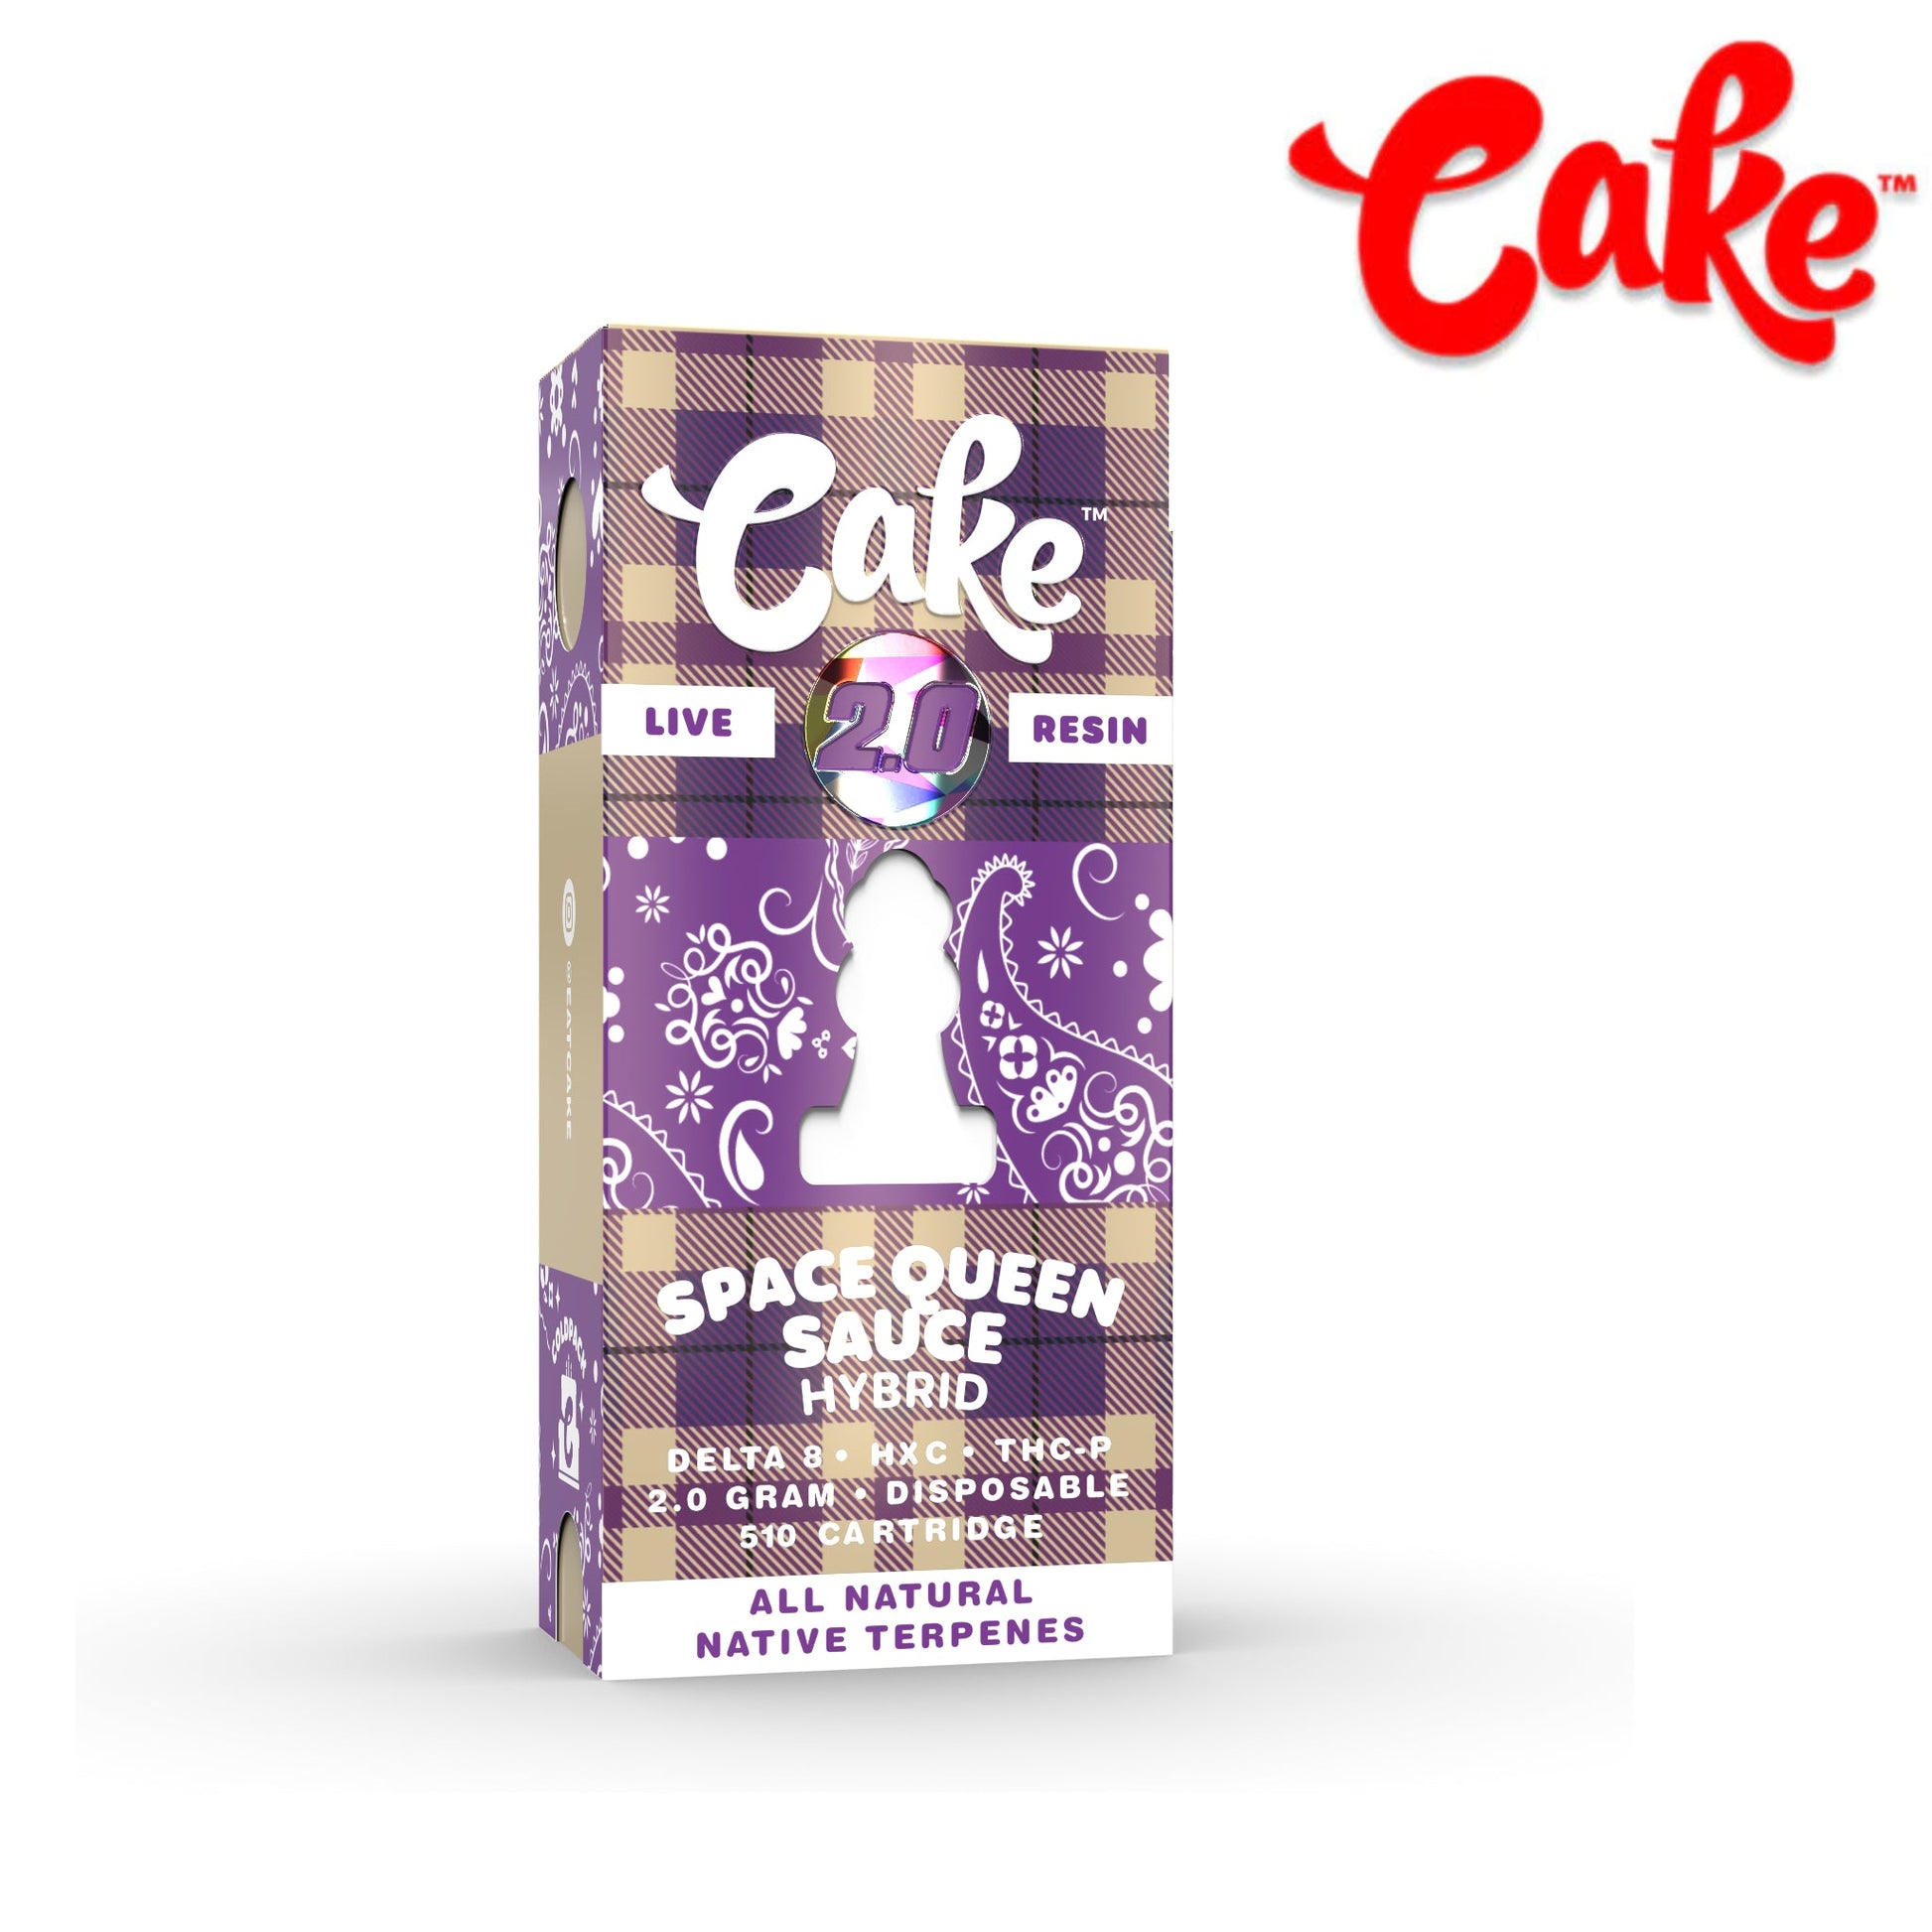 Cake Cold Pack Live Resin Vaporizer - 2000mg Space Queen Sauce